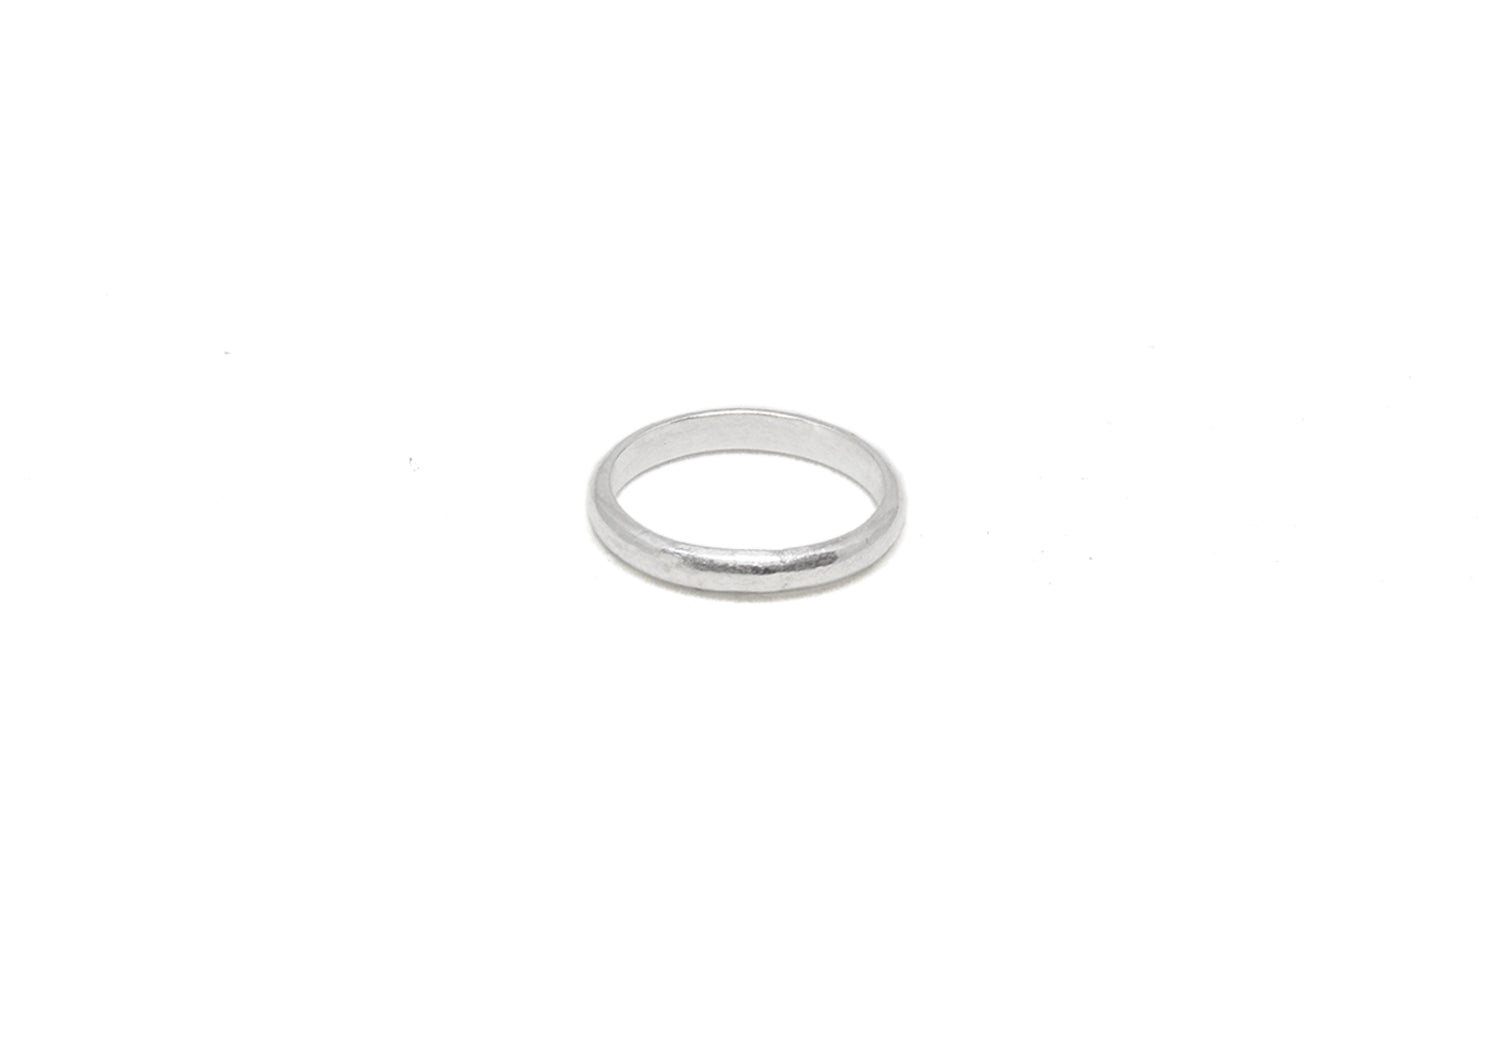 llayers-mens-women-engagement-stackable-silver-band-ring-one001-brooklyn-newyork-F2